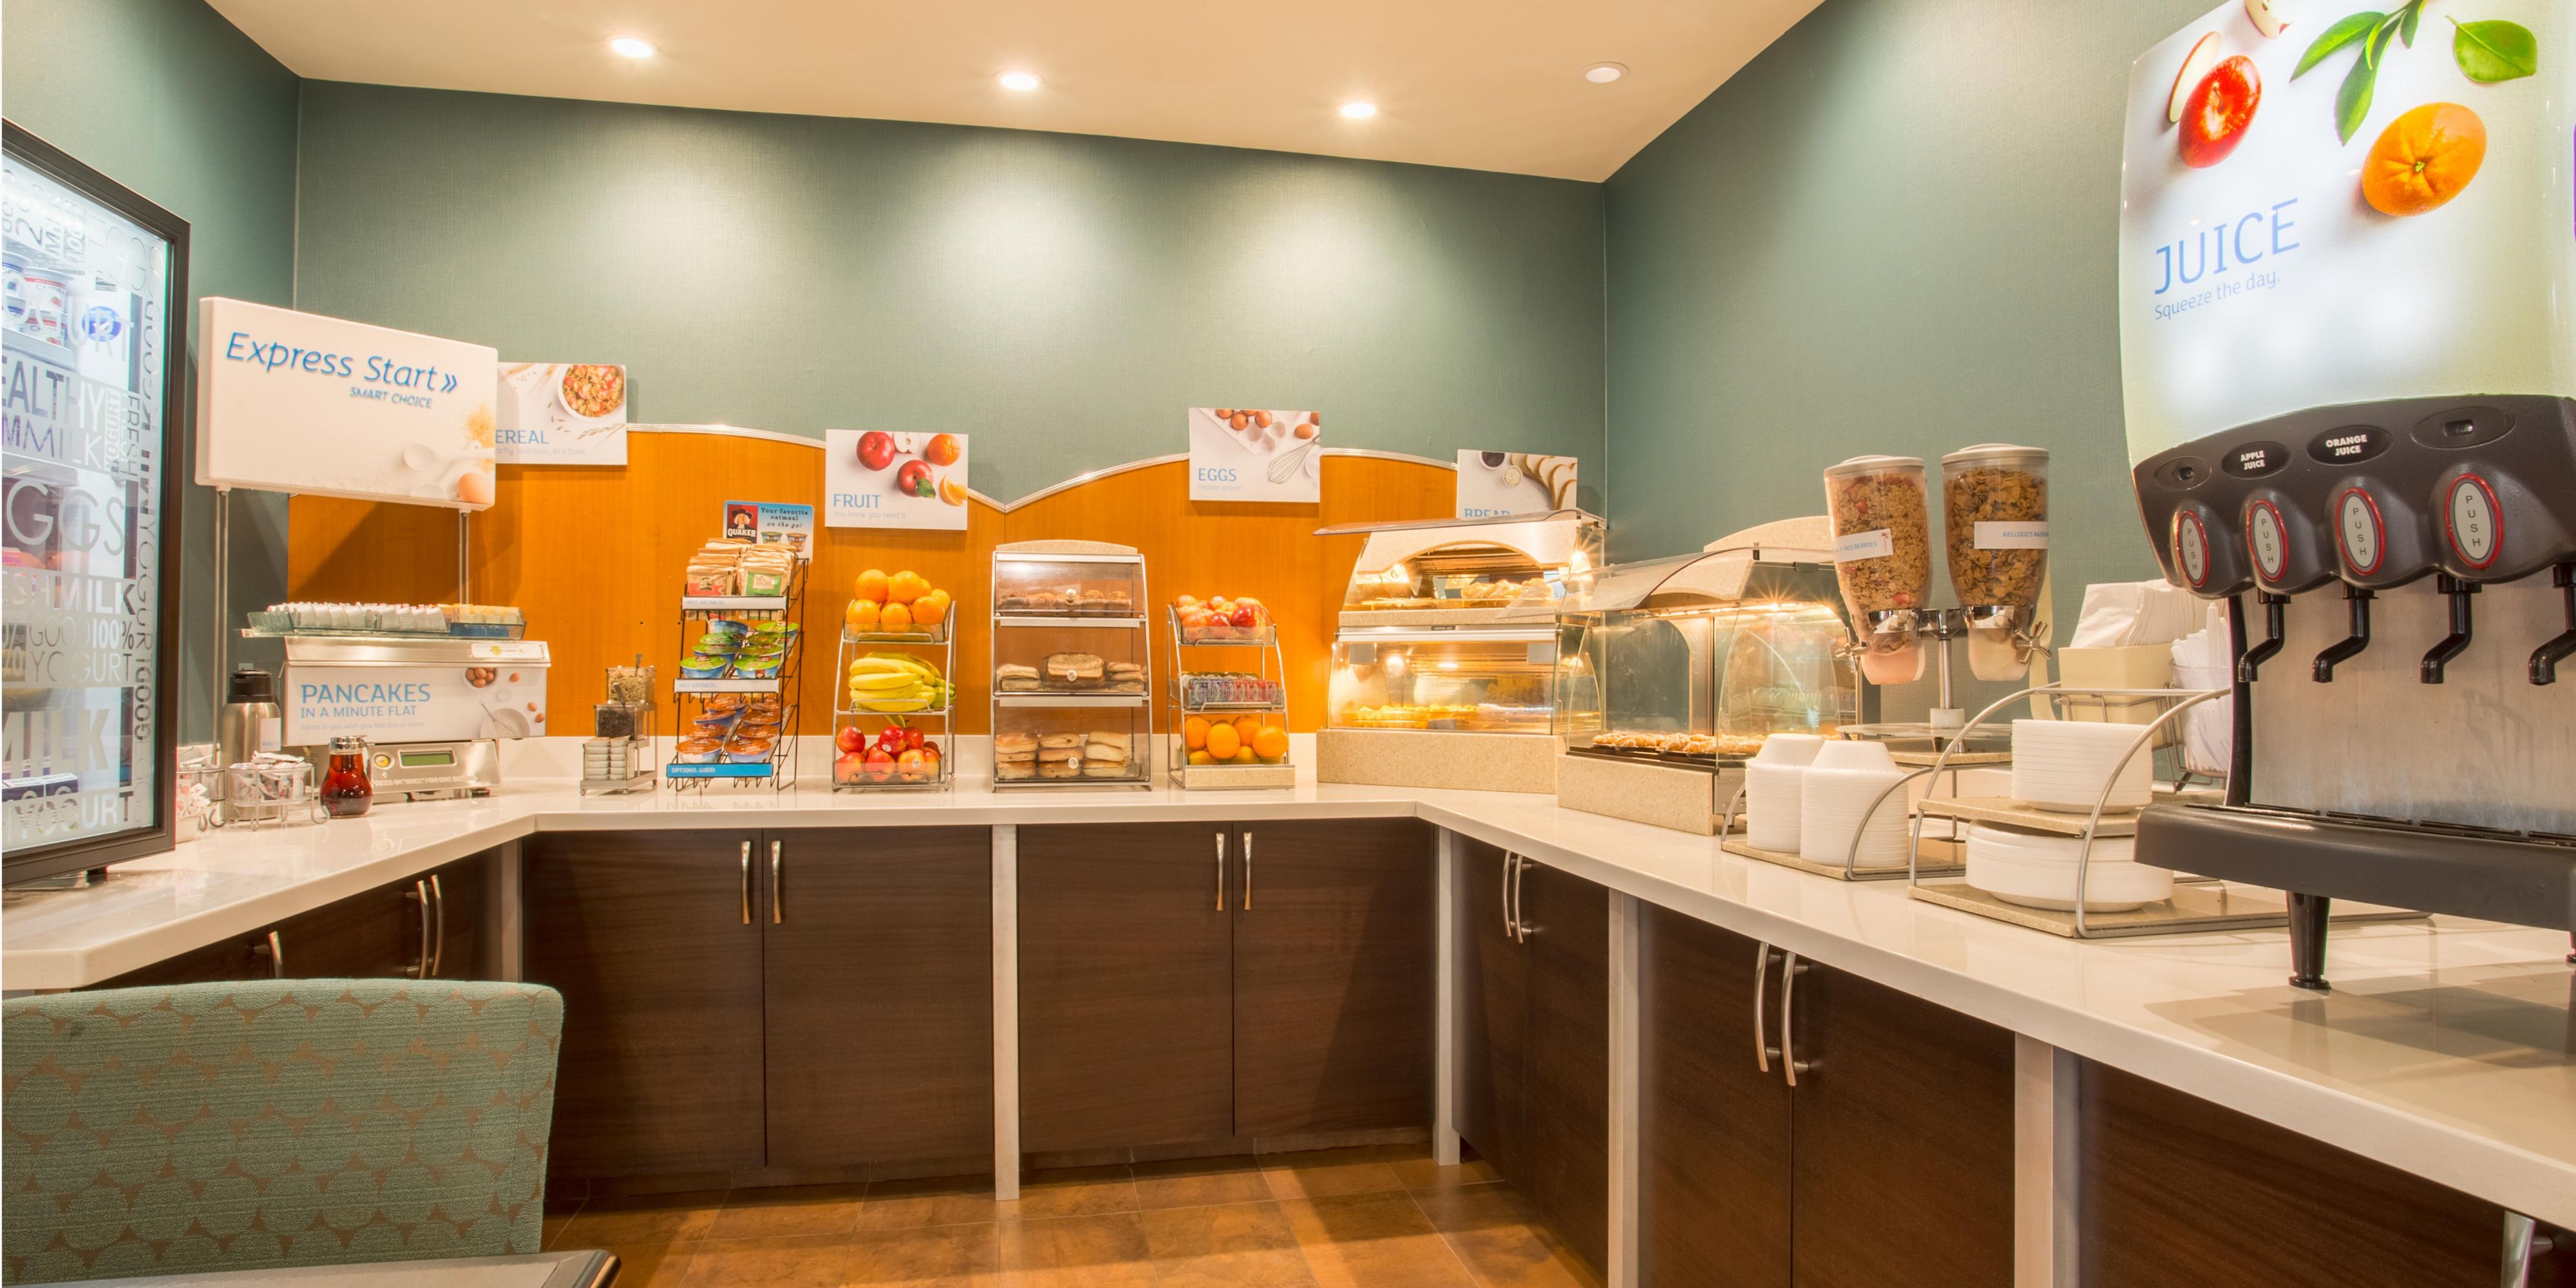 Our complimentary Express Start Breakfast bar offers a wide variety of hot & cold options including a rotation of egg & meat selections, biscuits or muffins, fruit, our famous cinnamon rolls & Smart Roast coffee.